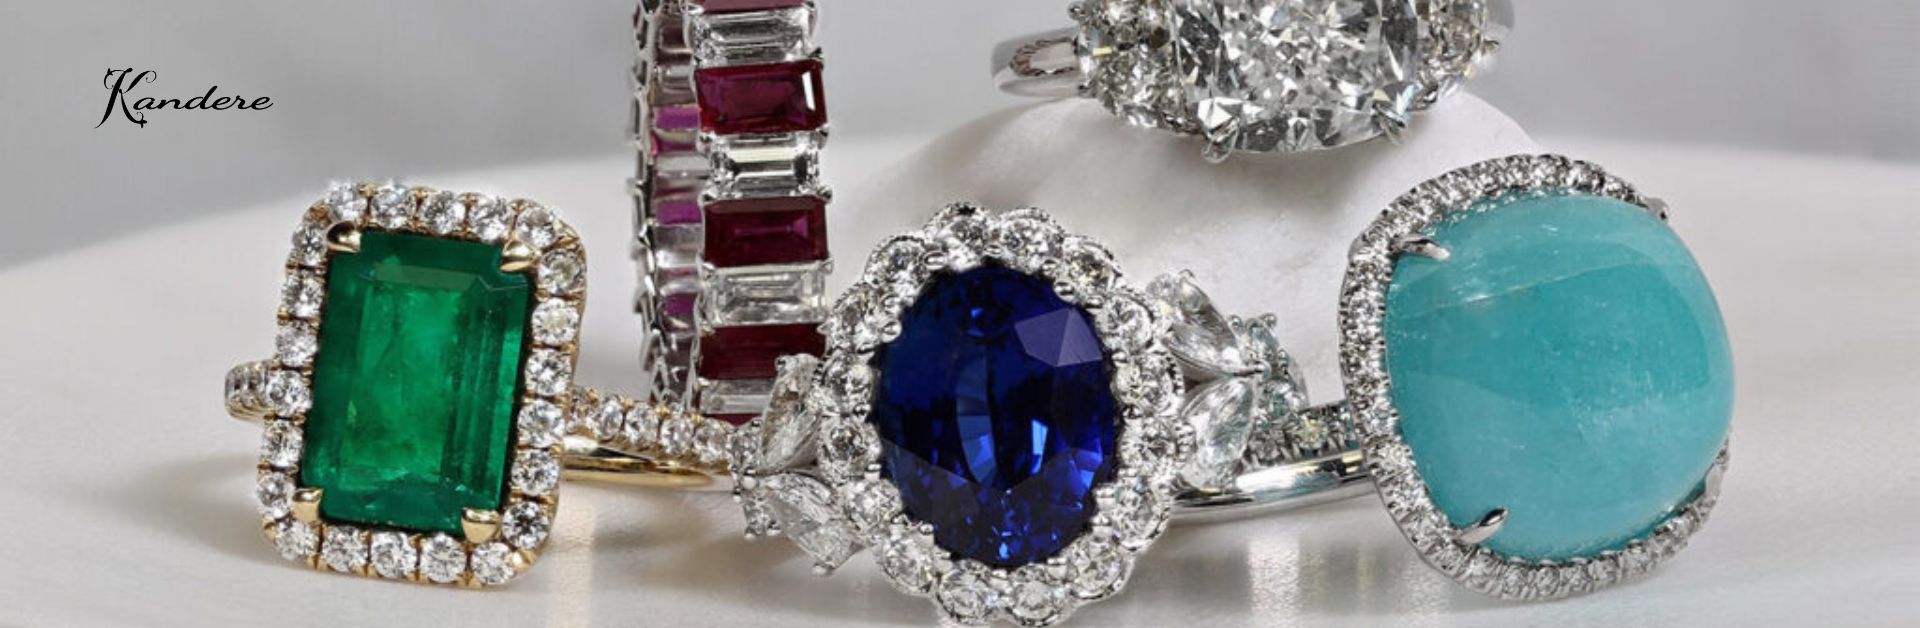 What are the most popular jewelry styles?